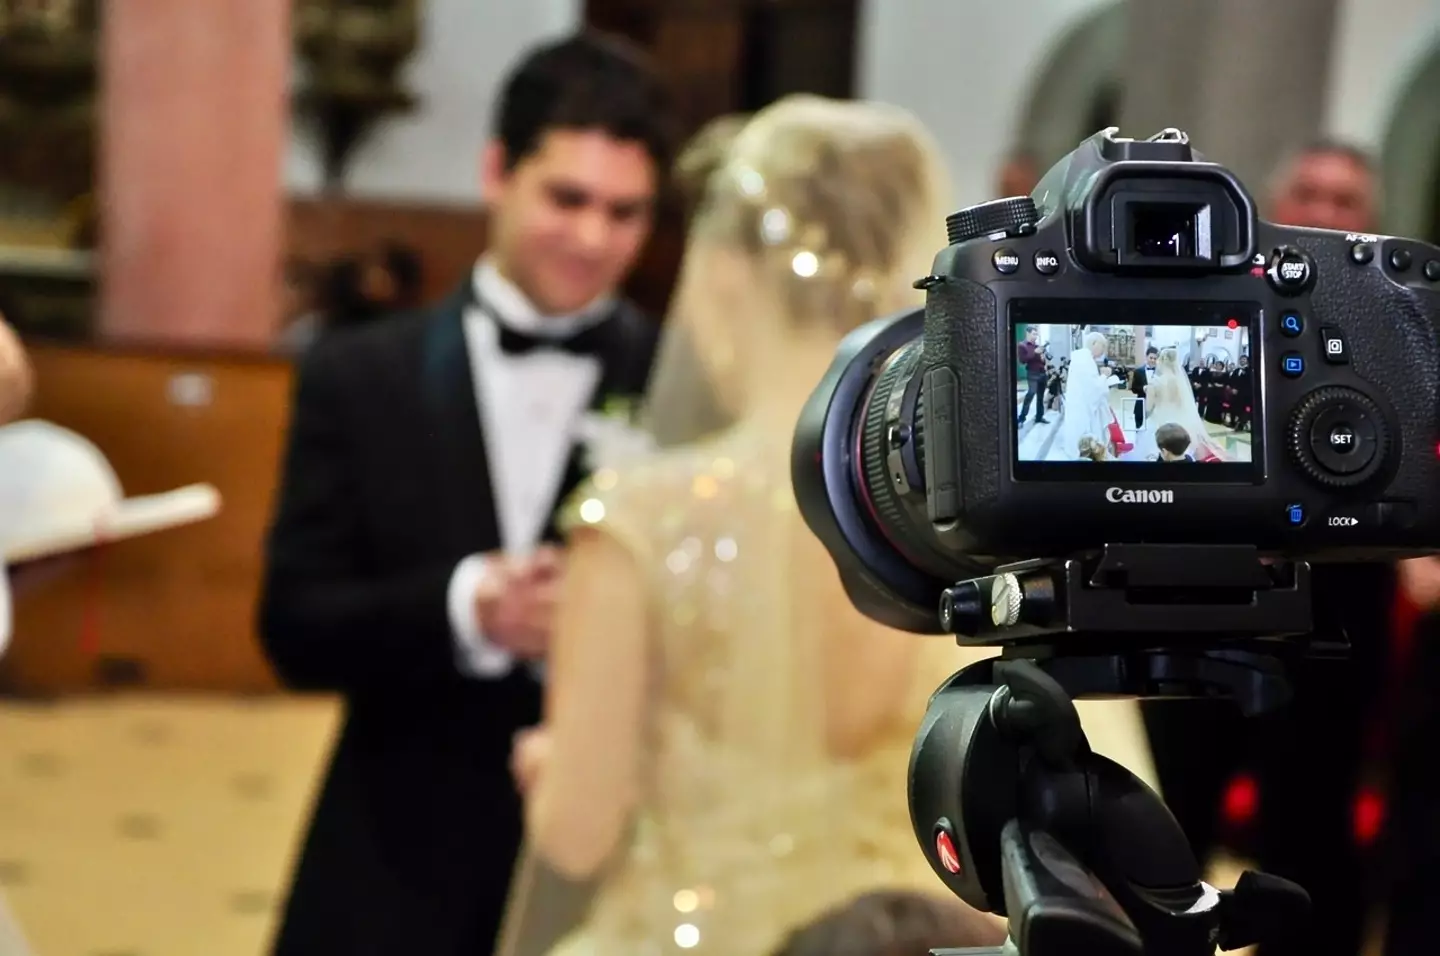 Wedding photographers have dished the dirt on Reddit.